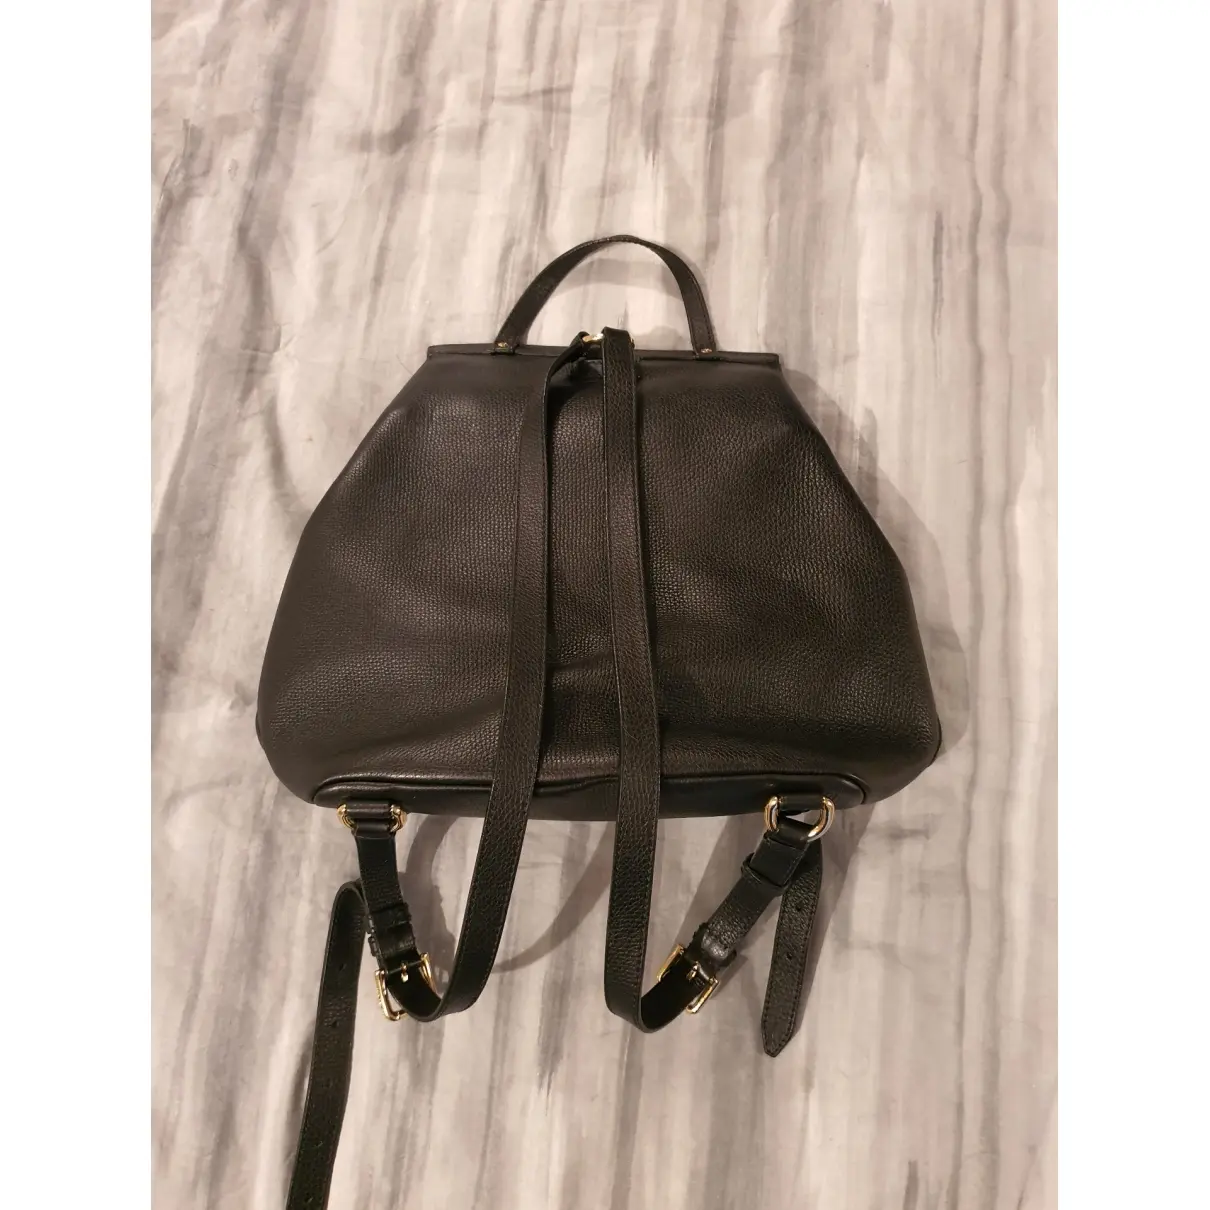 Dolce & Gabbana Sicily leather backpack for sale